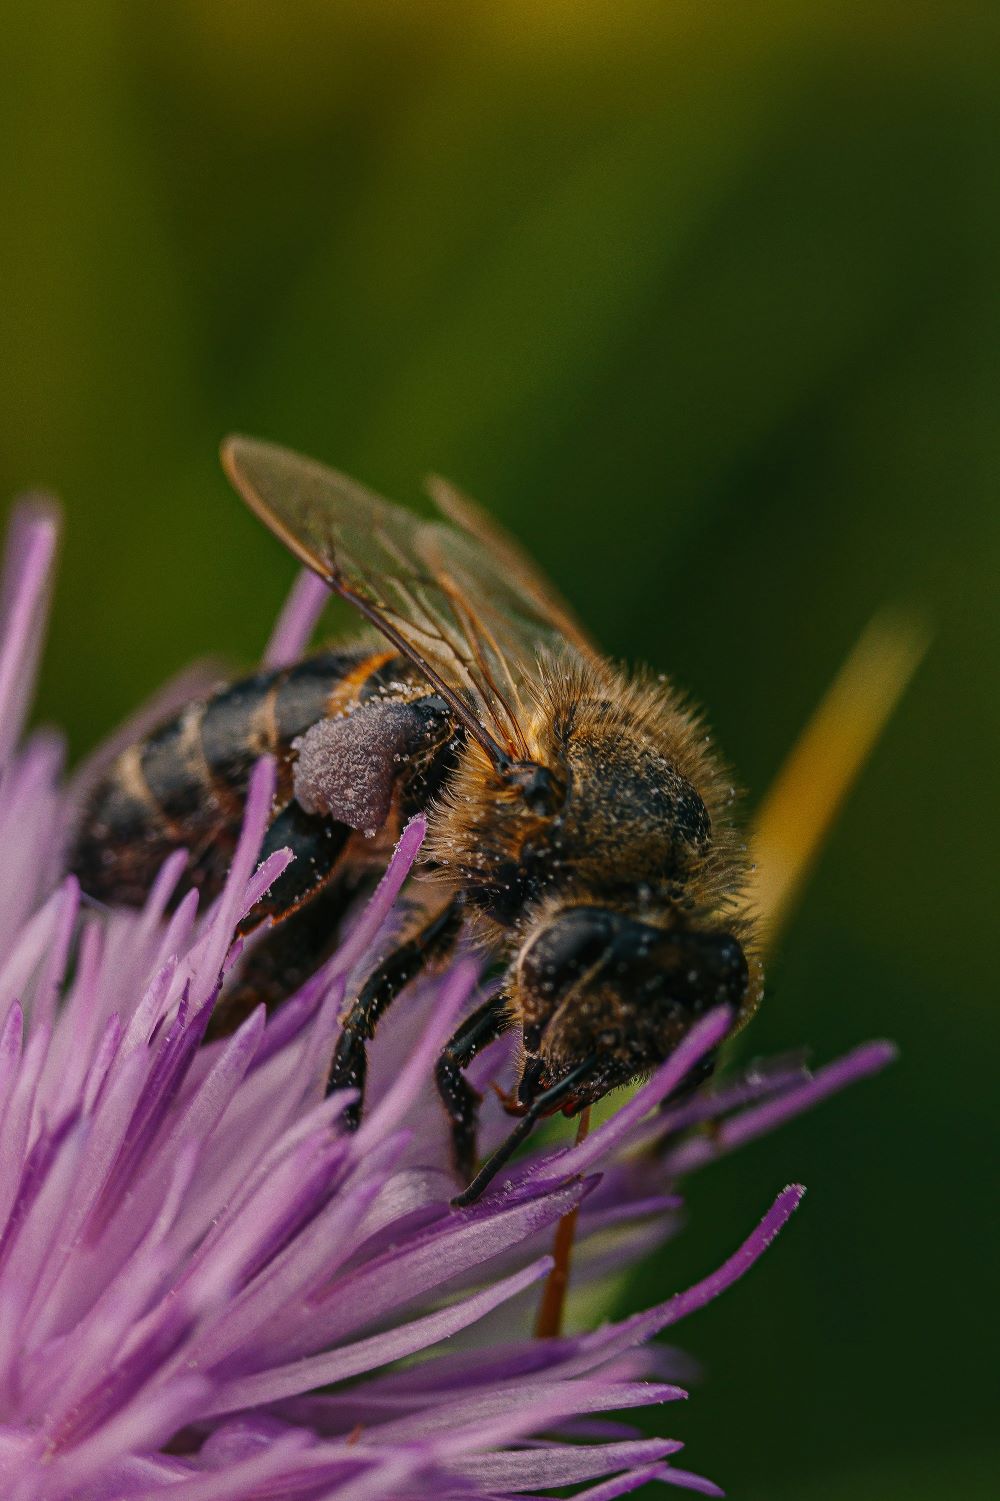 Wild Bees Need Motherly Love Just Like Humans